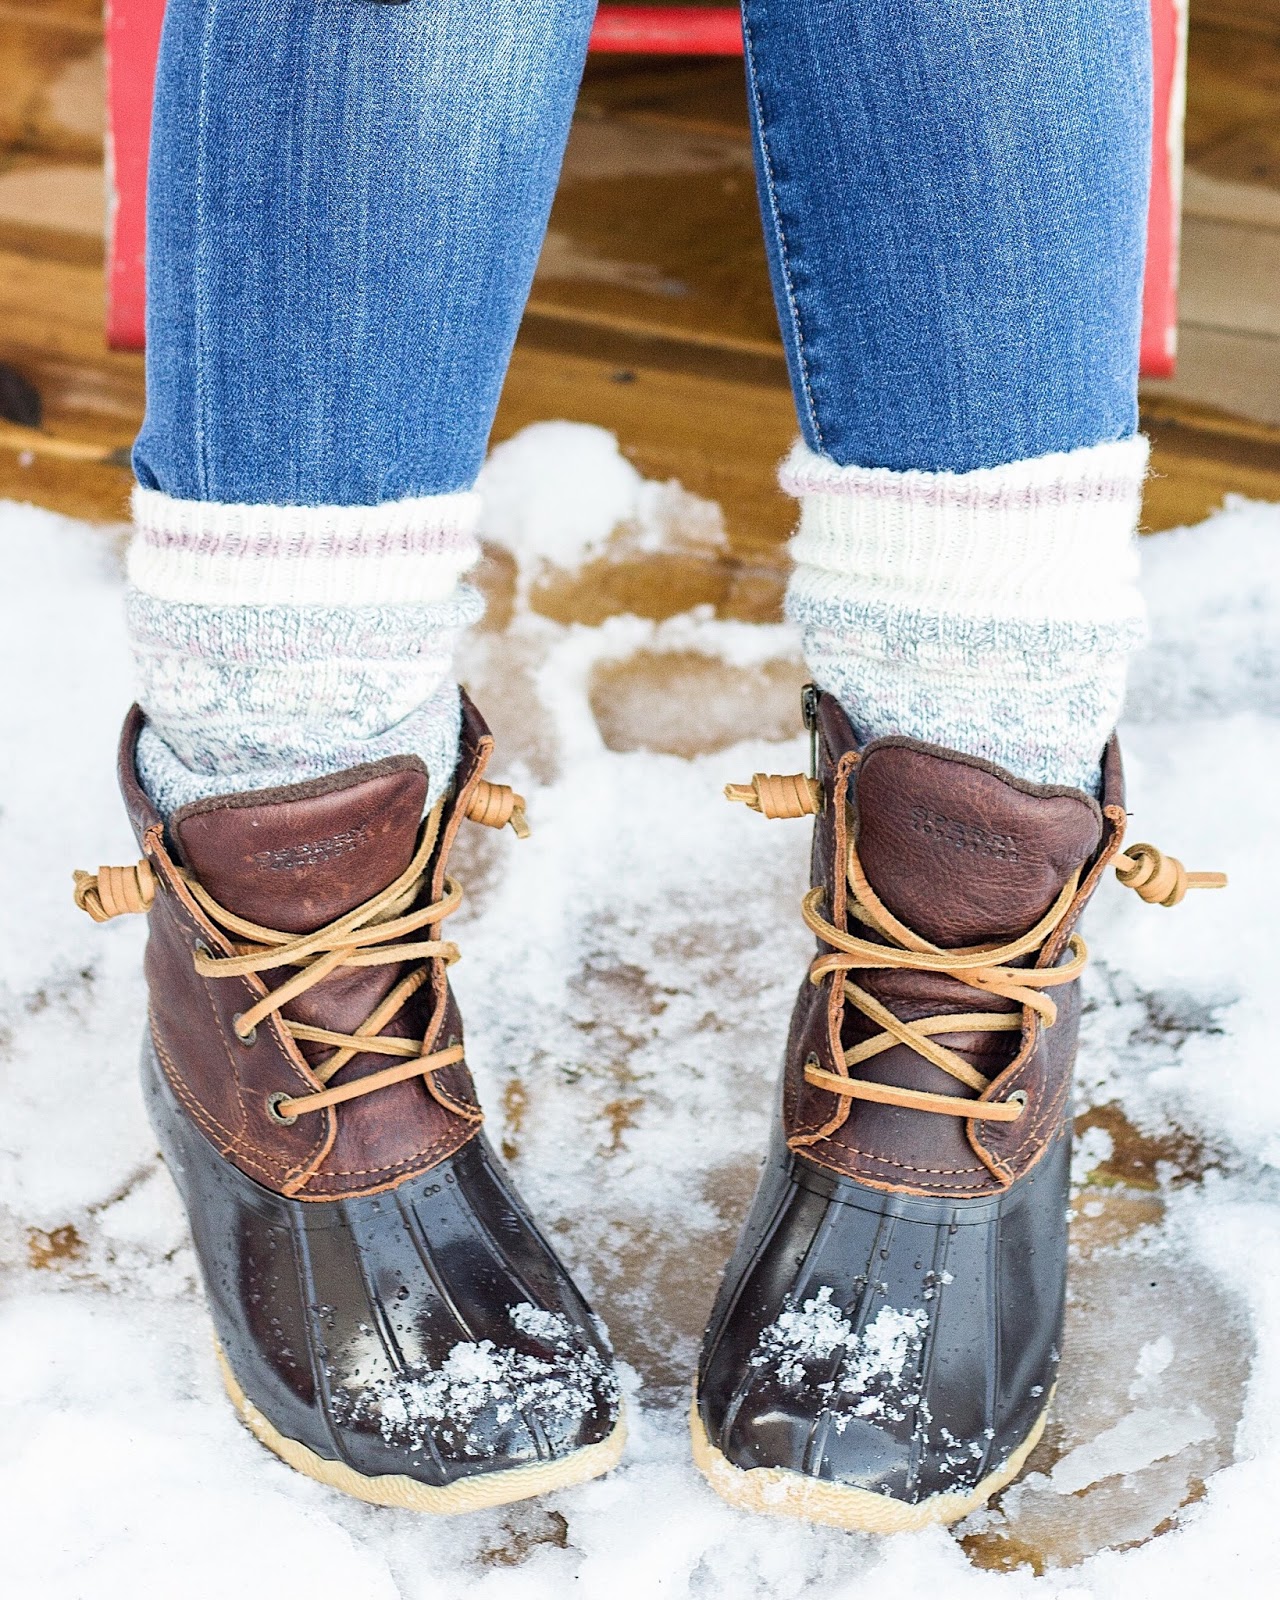 elliven studio: One Step At A Time - Sperry Saltwater Boots